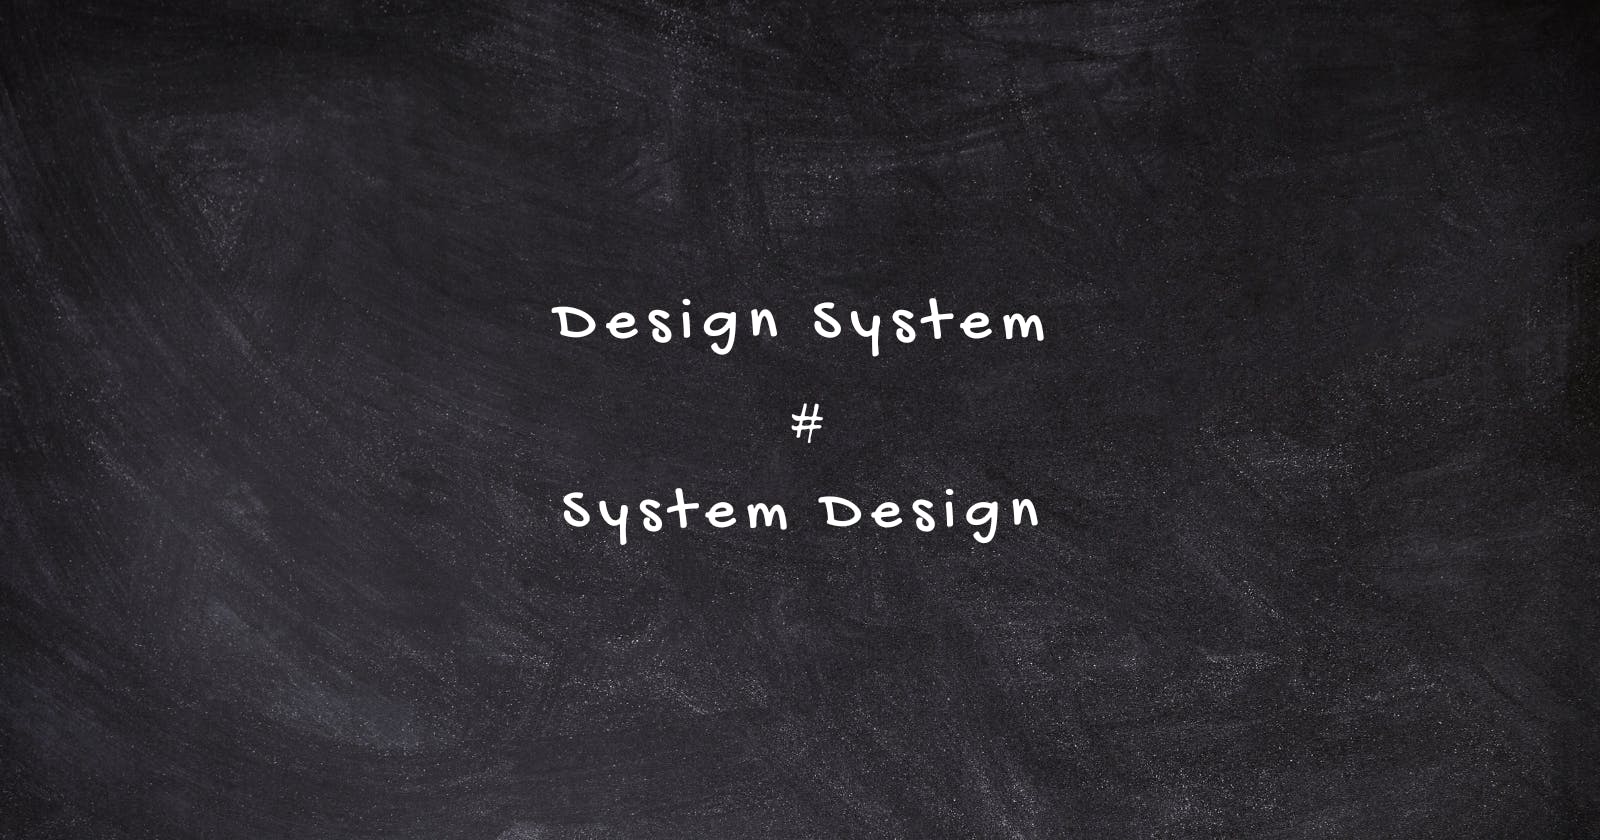 Understanding the Difference Between Design System and System Design